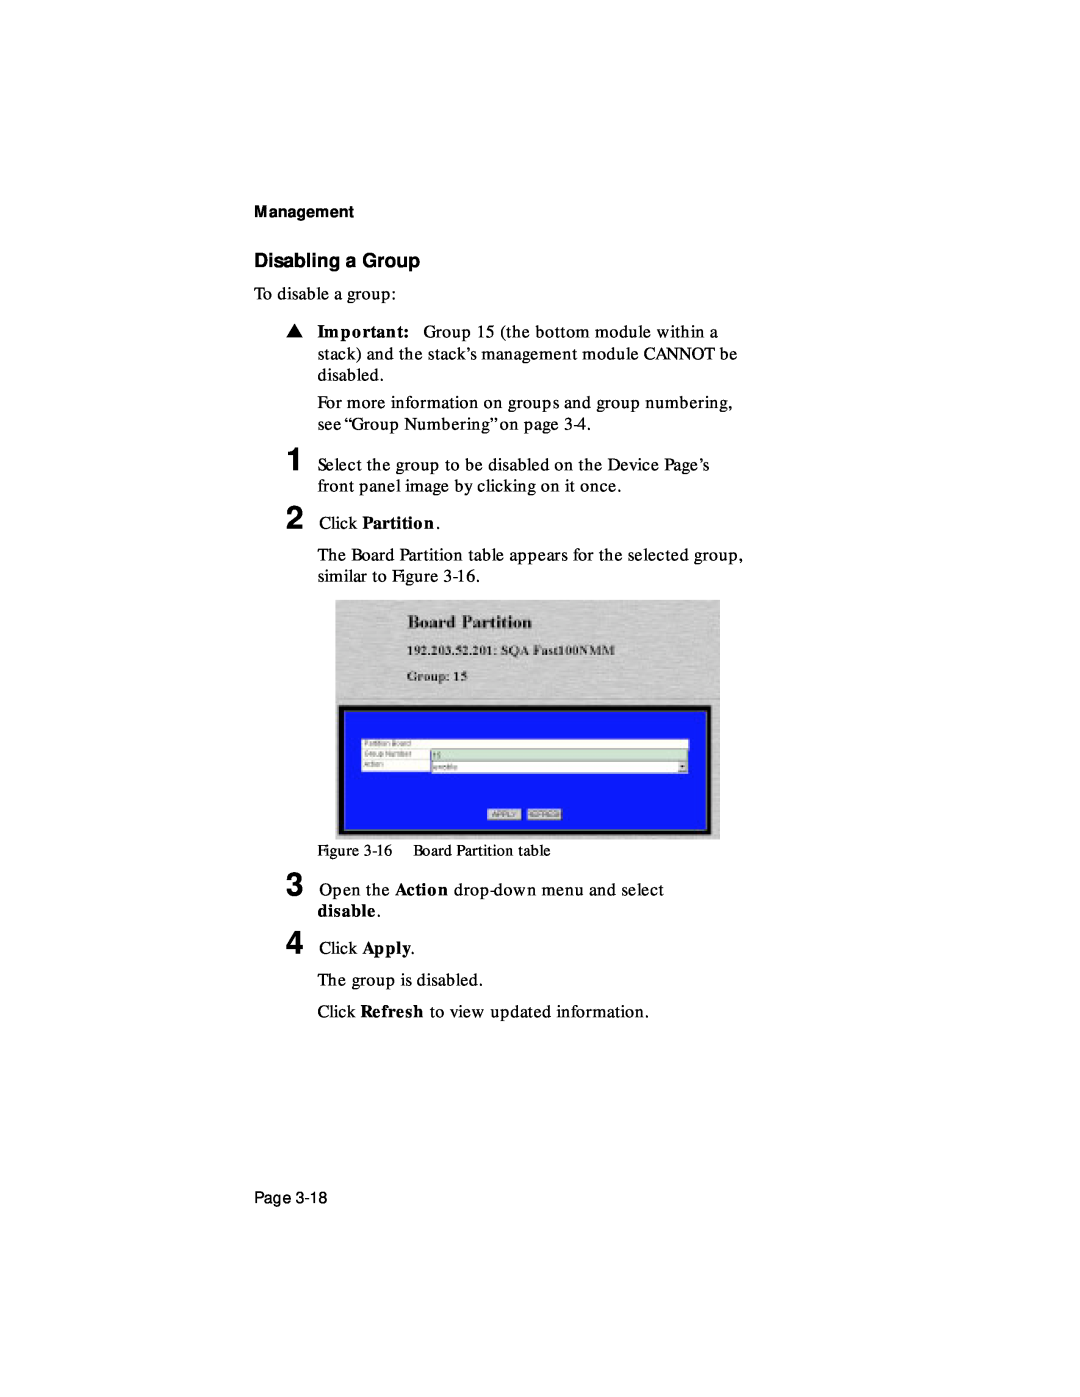 Asante Technologies 100TX user manual Disabling a Group, To disable a group, Management, Page 